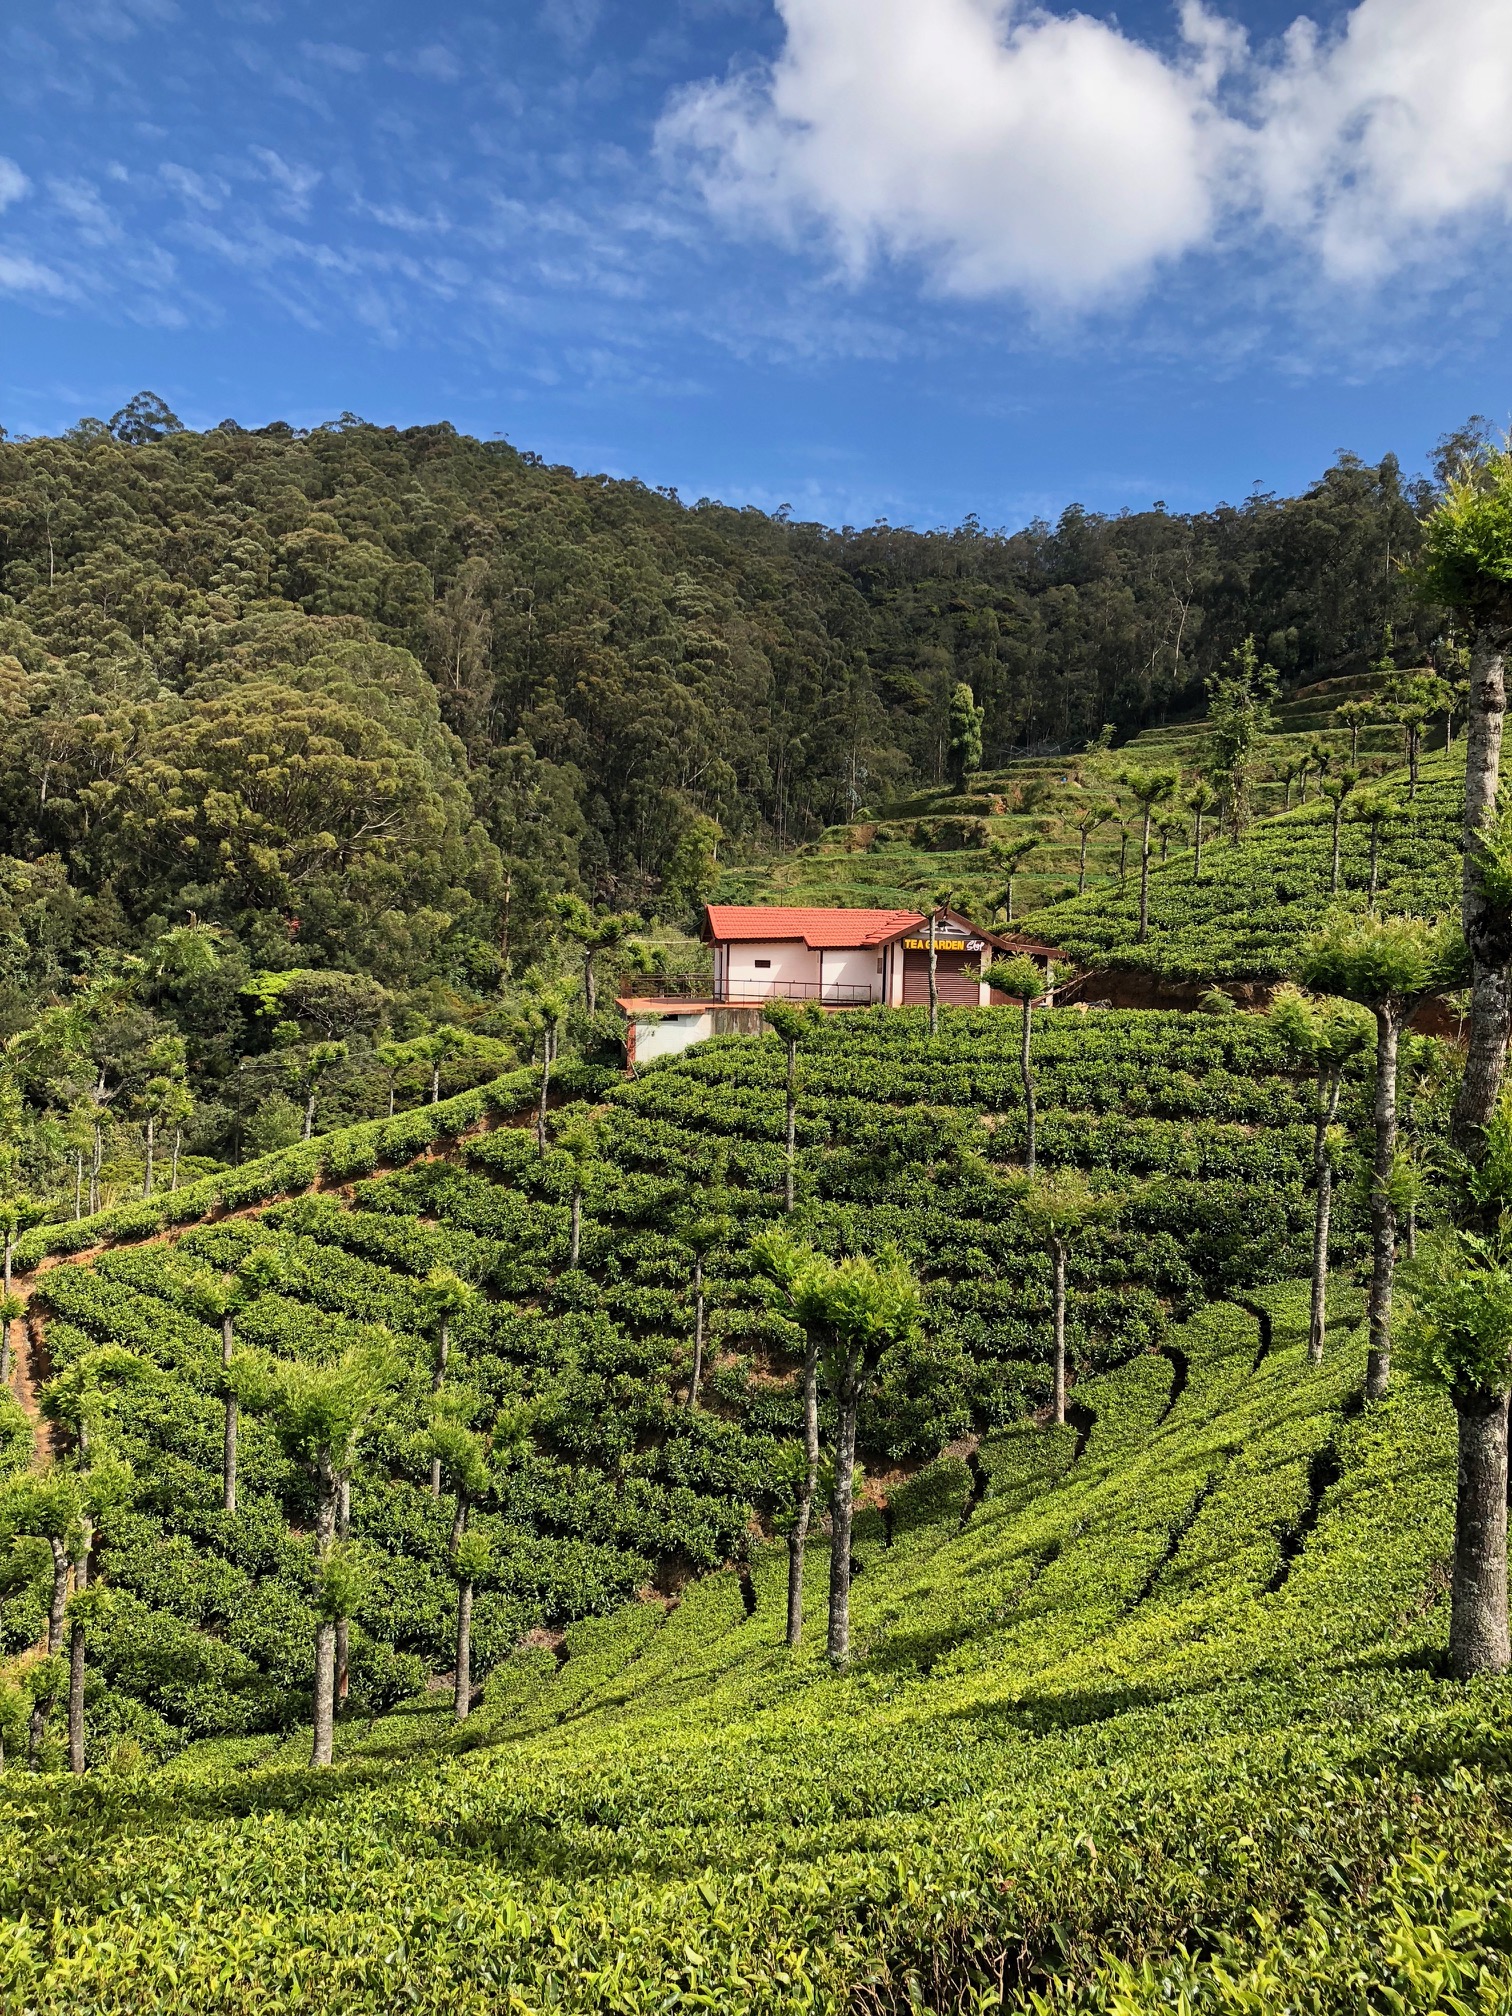 Rows and rows of short plants cover a hillside with a tea garden, surrounded by trees.